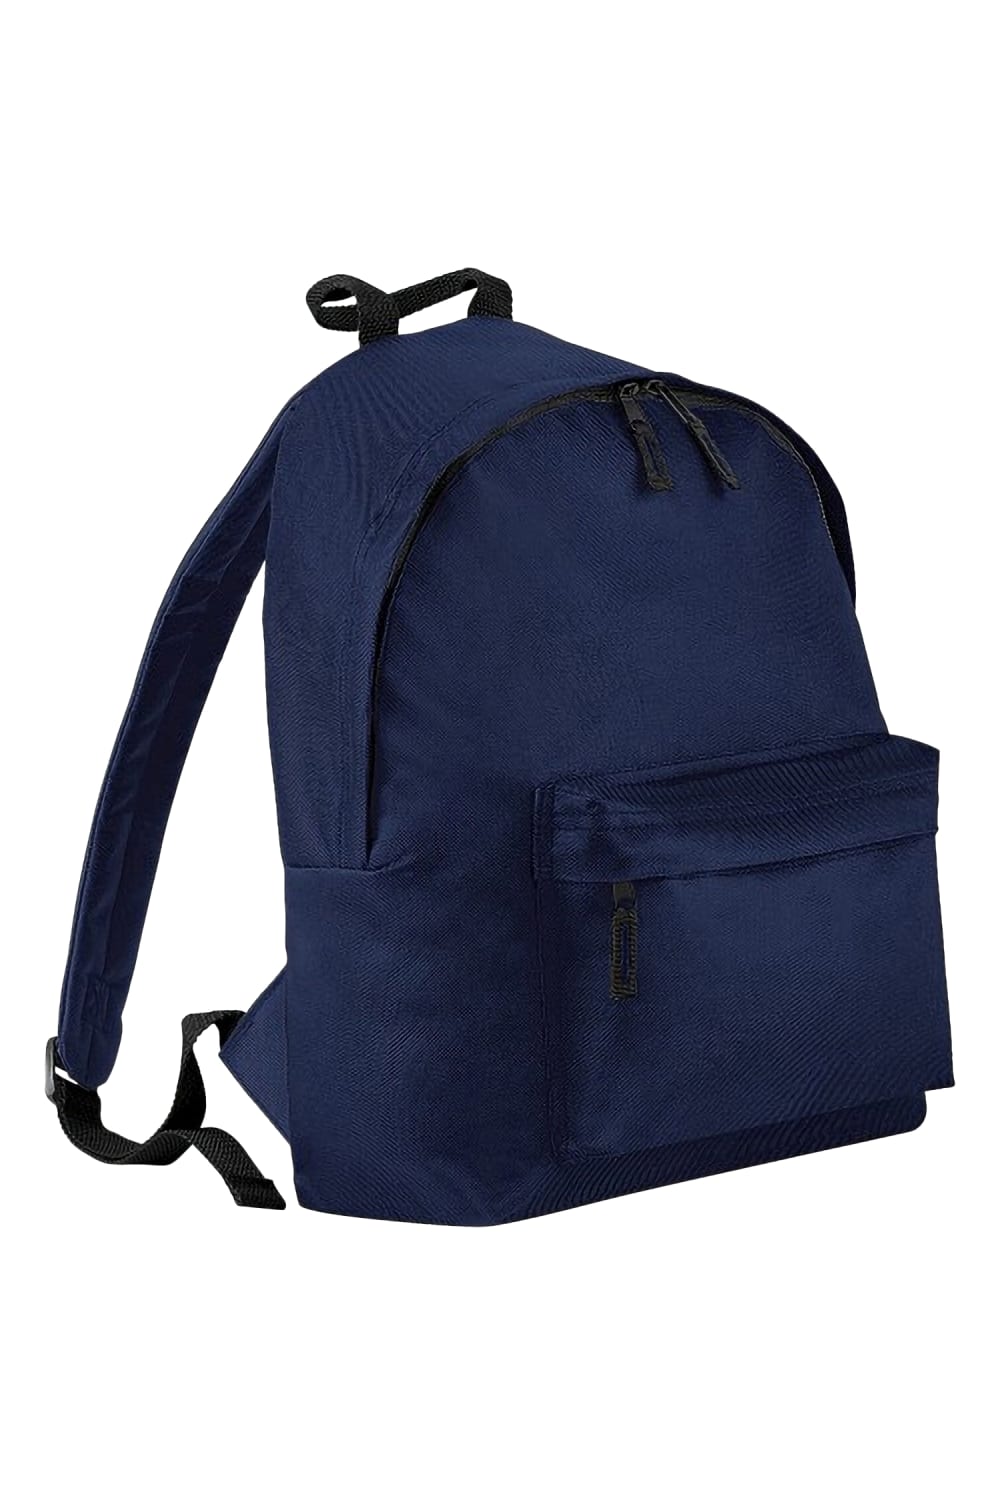 Junior Fashion Backpack / Rucksack (14 Liters) (Pack of 2) (French Navy)